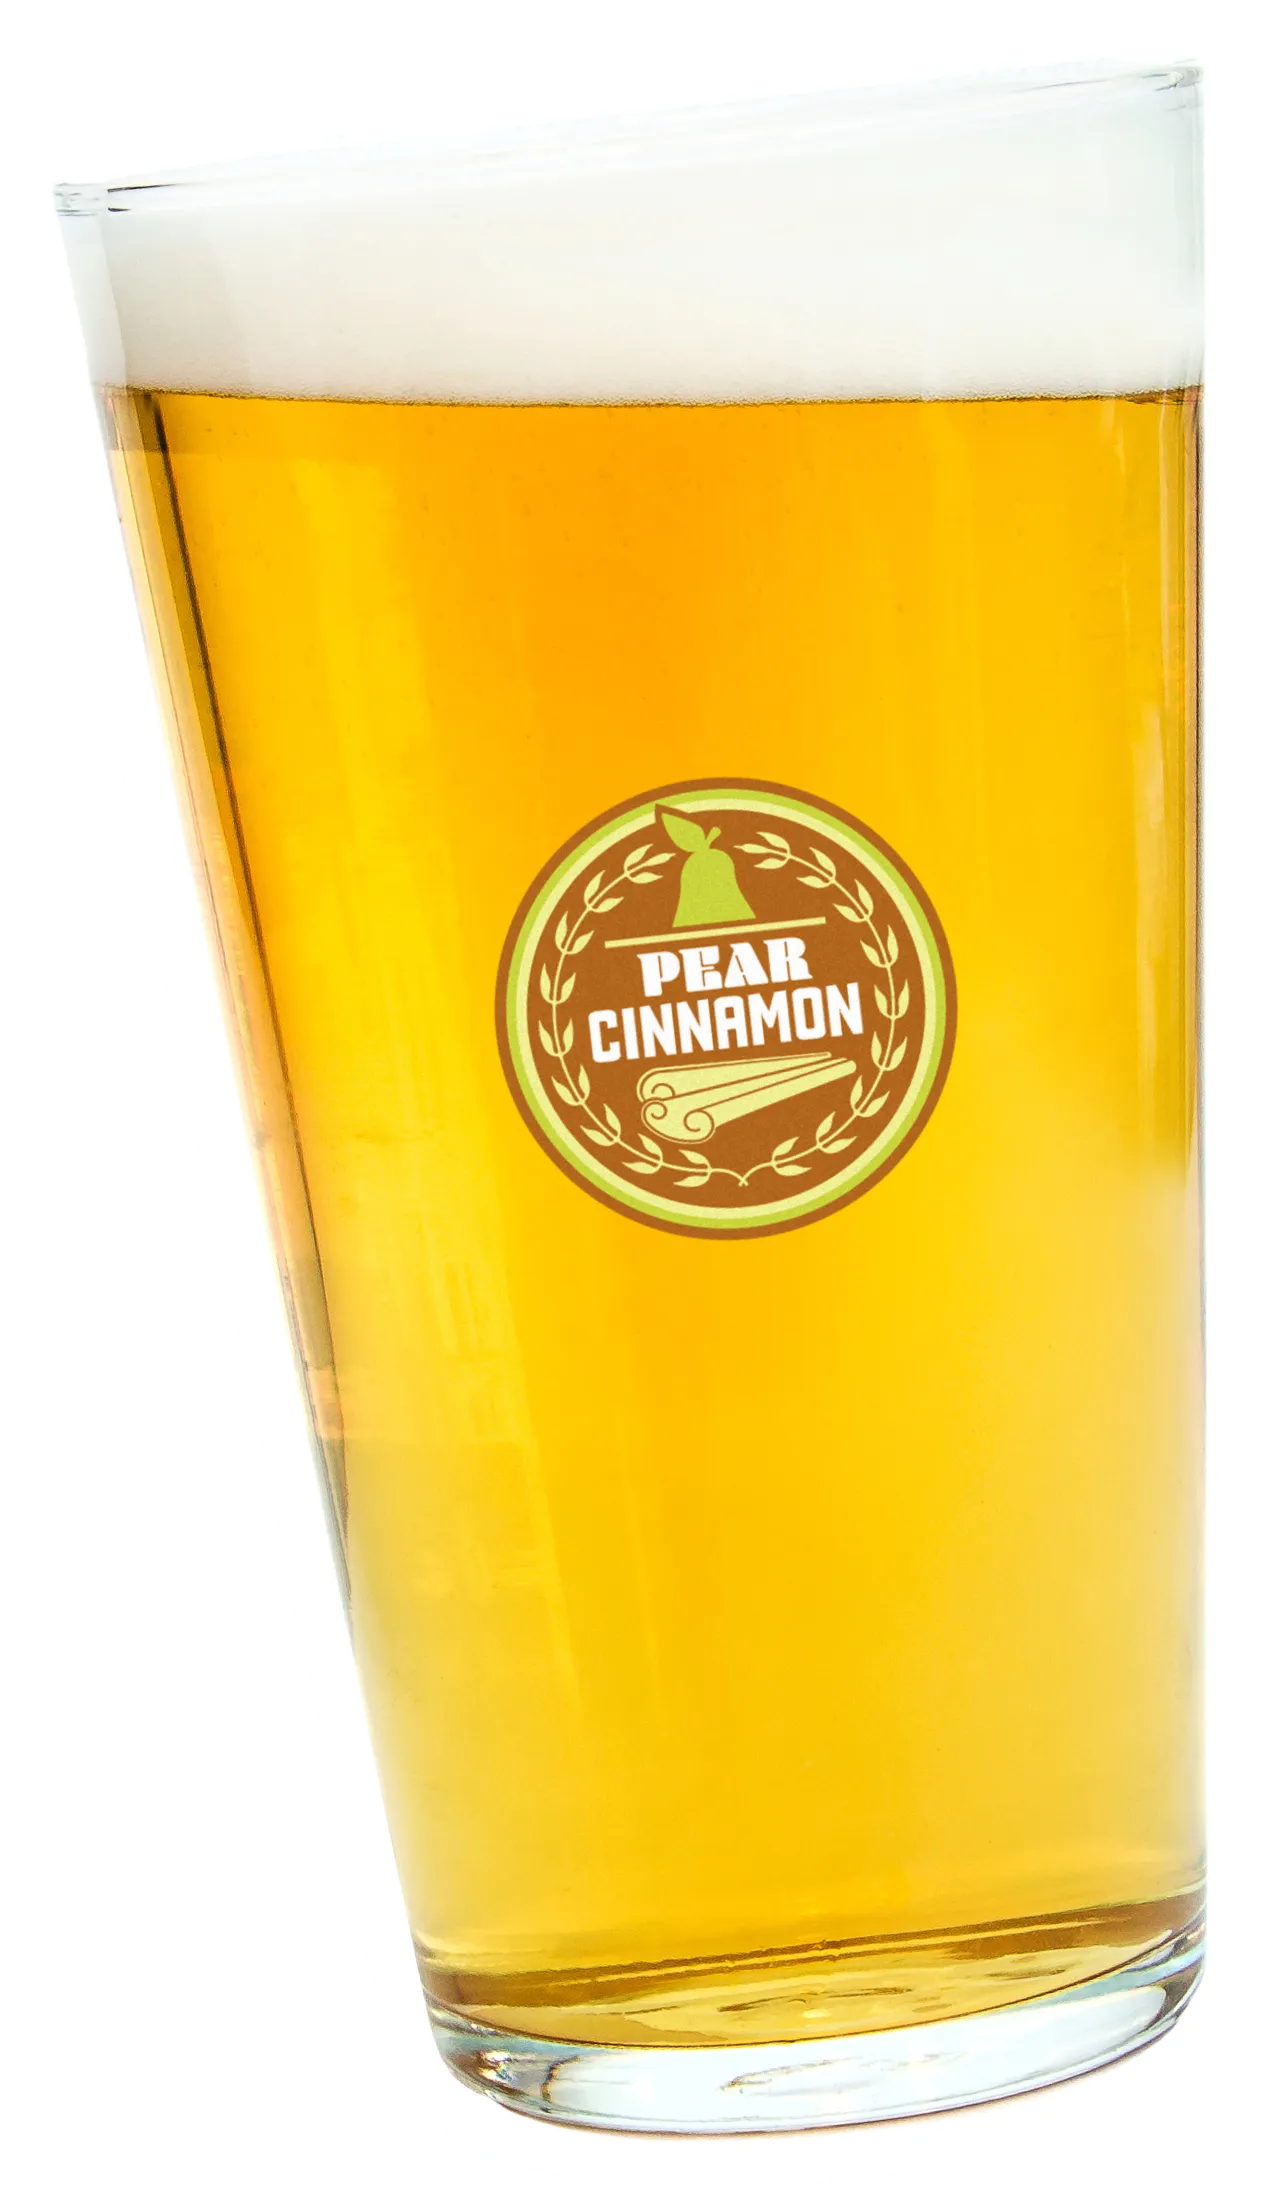 A tilted pint of beer with a "Pear Cinnamon" logo.